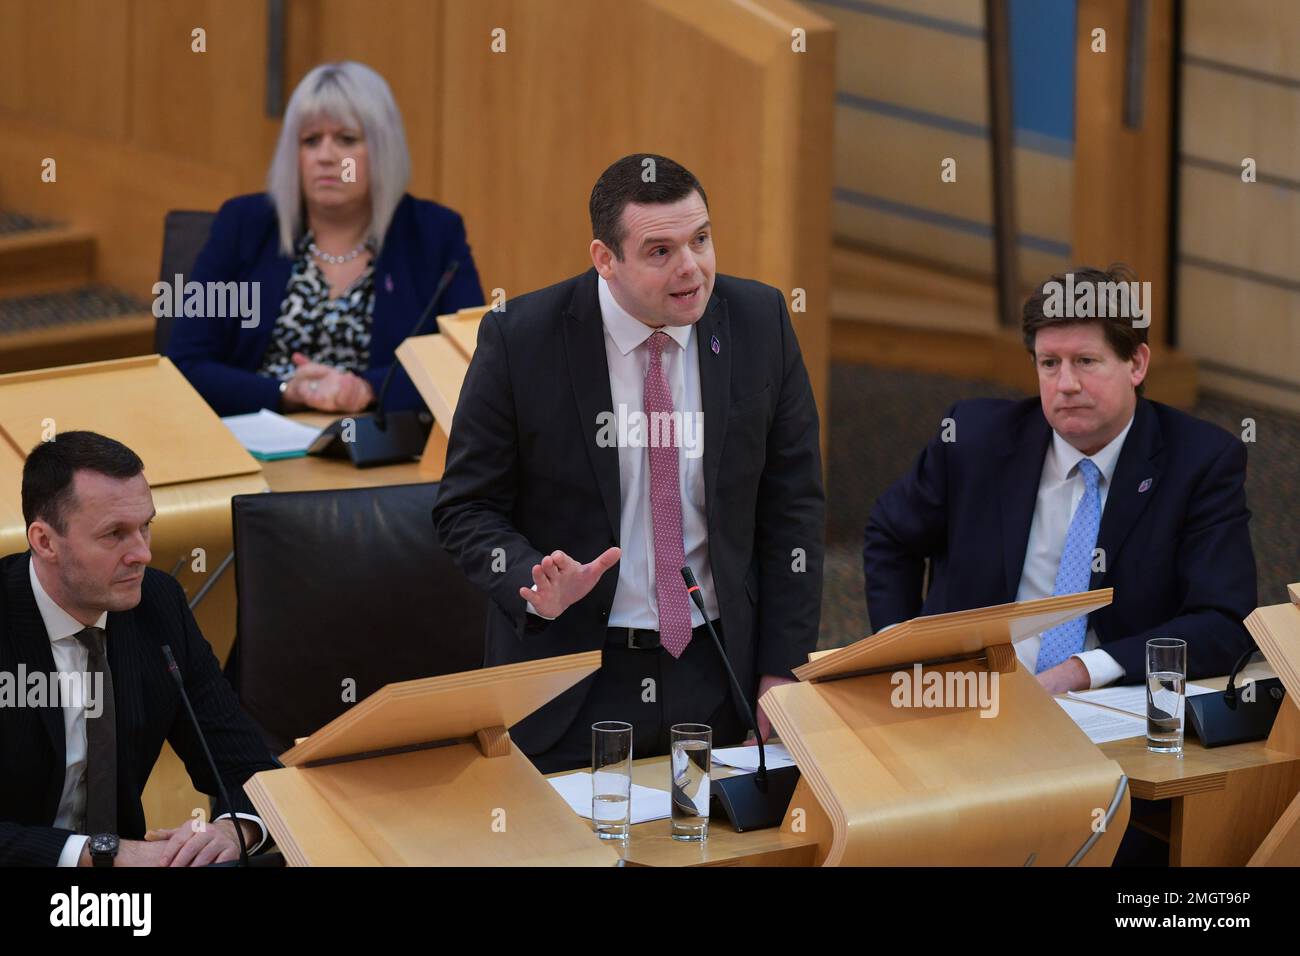 Edinburgh Scotland, UK 26 January 2023. Scottish Conservative leader Douglas Ross at First Minister Questions at the Scottish Parliament. credit sst/alamy live news Stock Photo